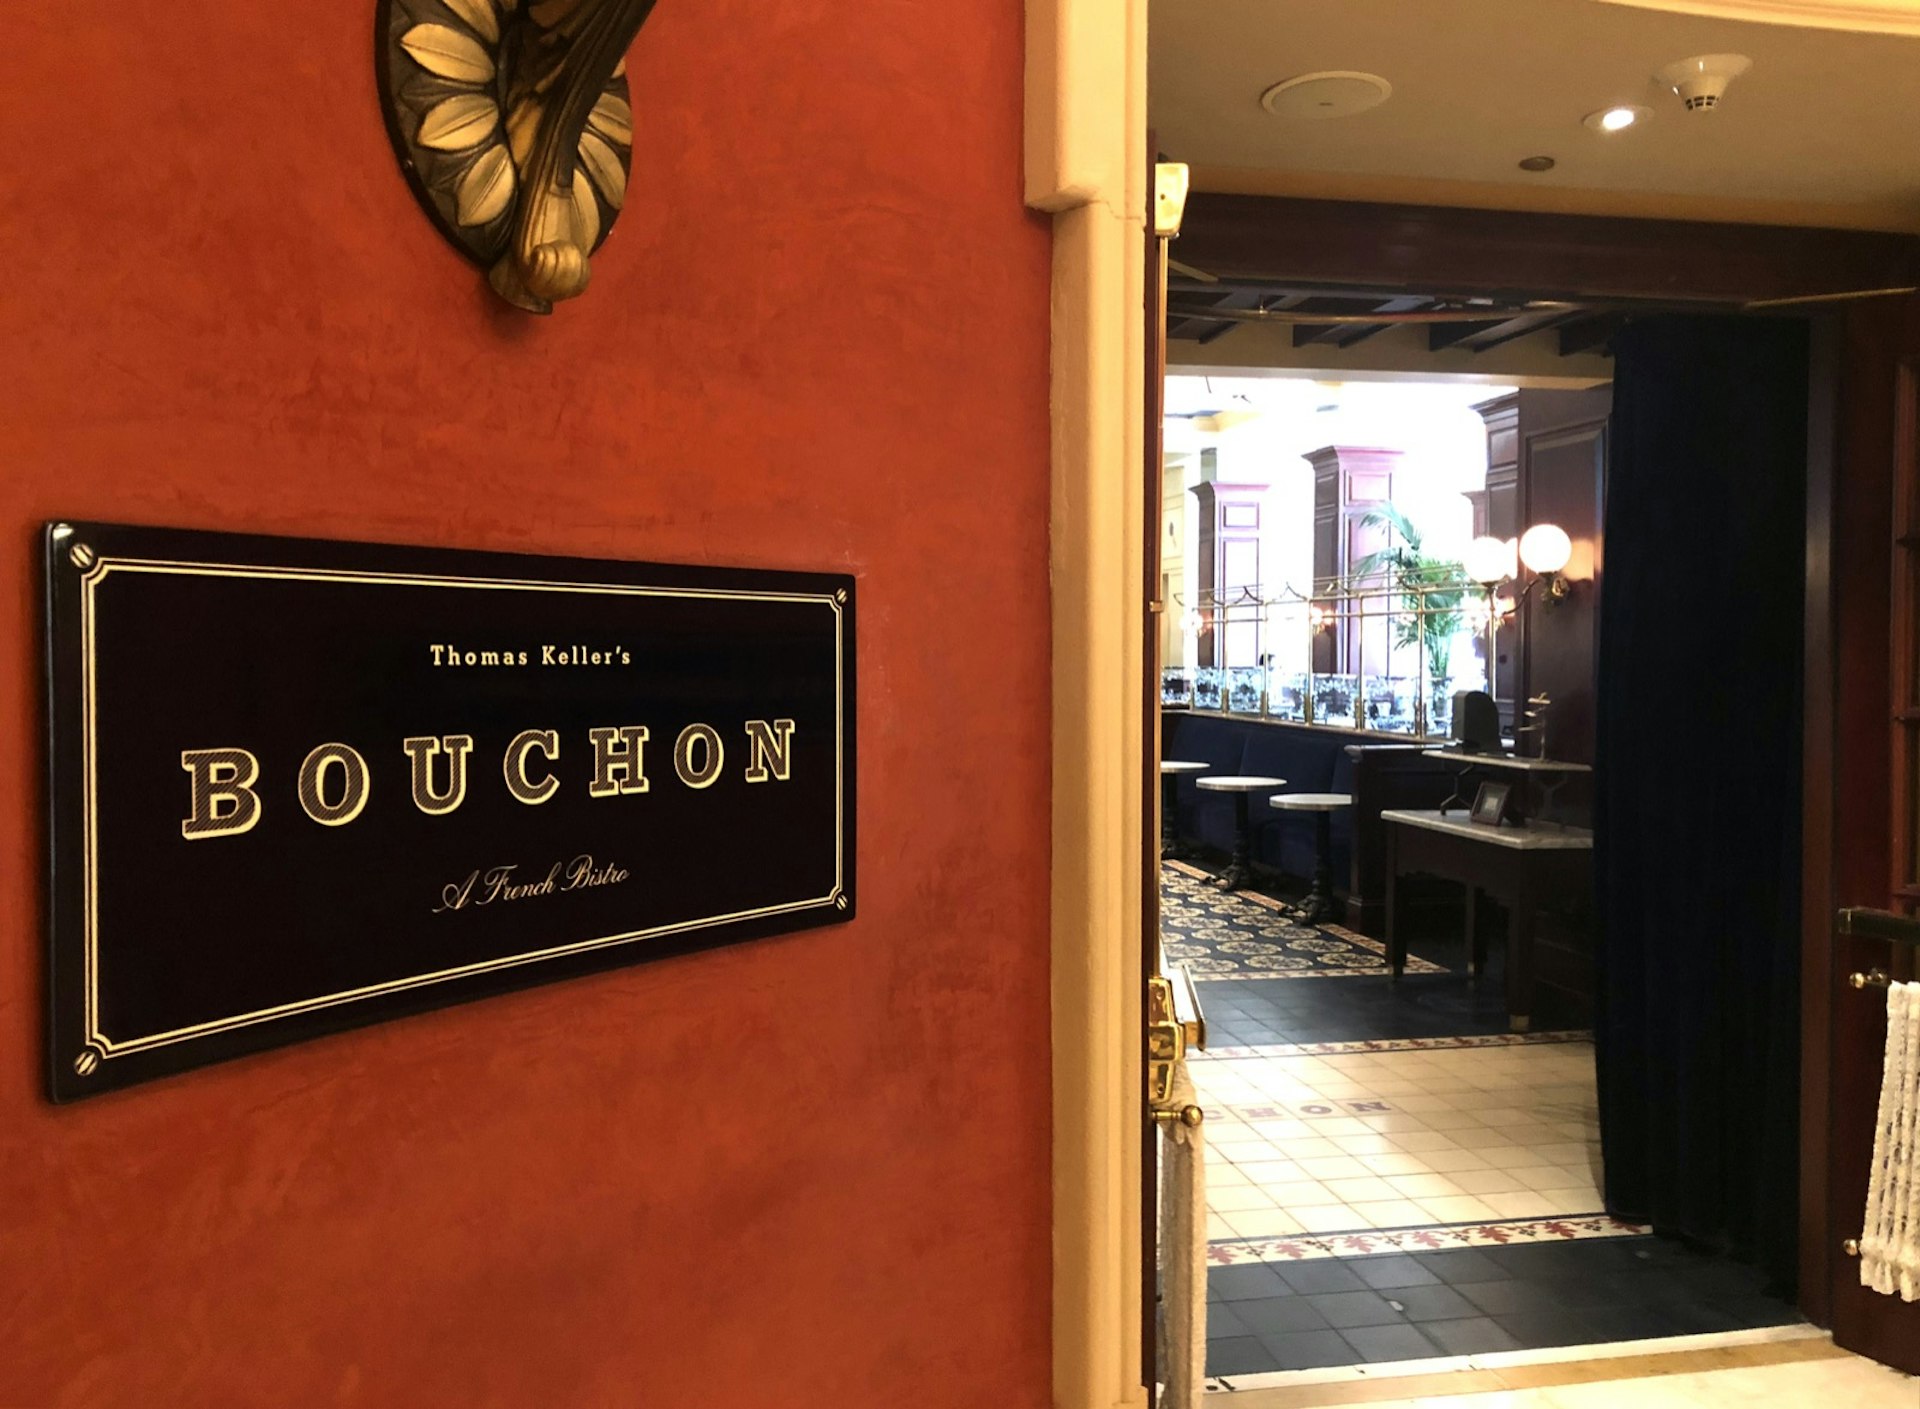 A small black sign marks the entrance to Bouchon, a celebrity chef restaurant in Las Vegas